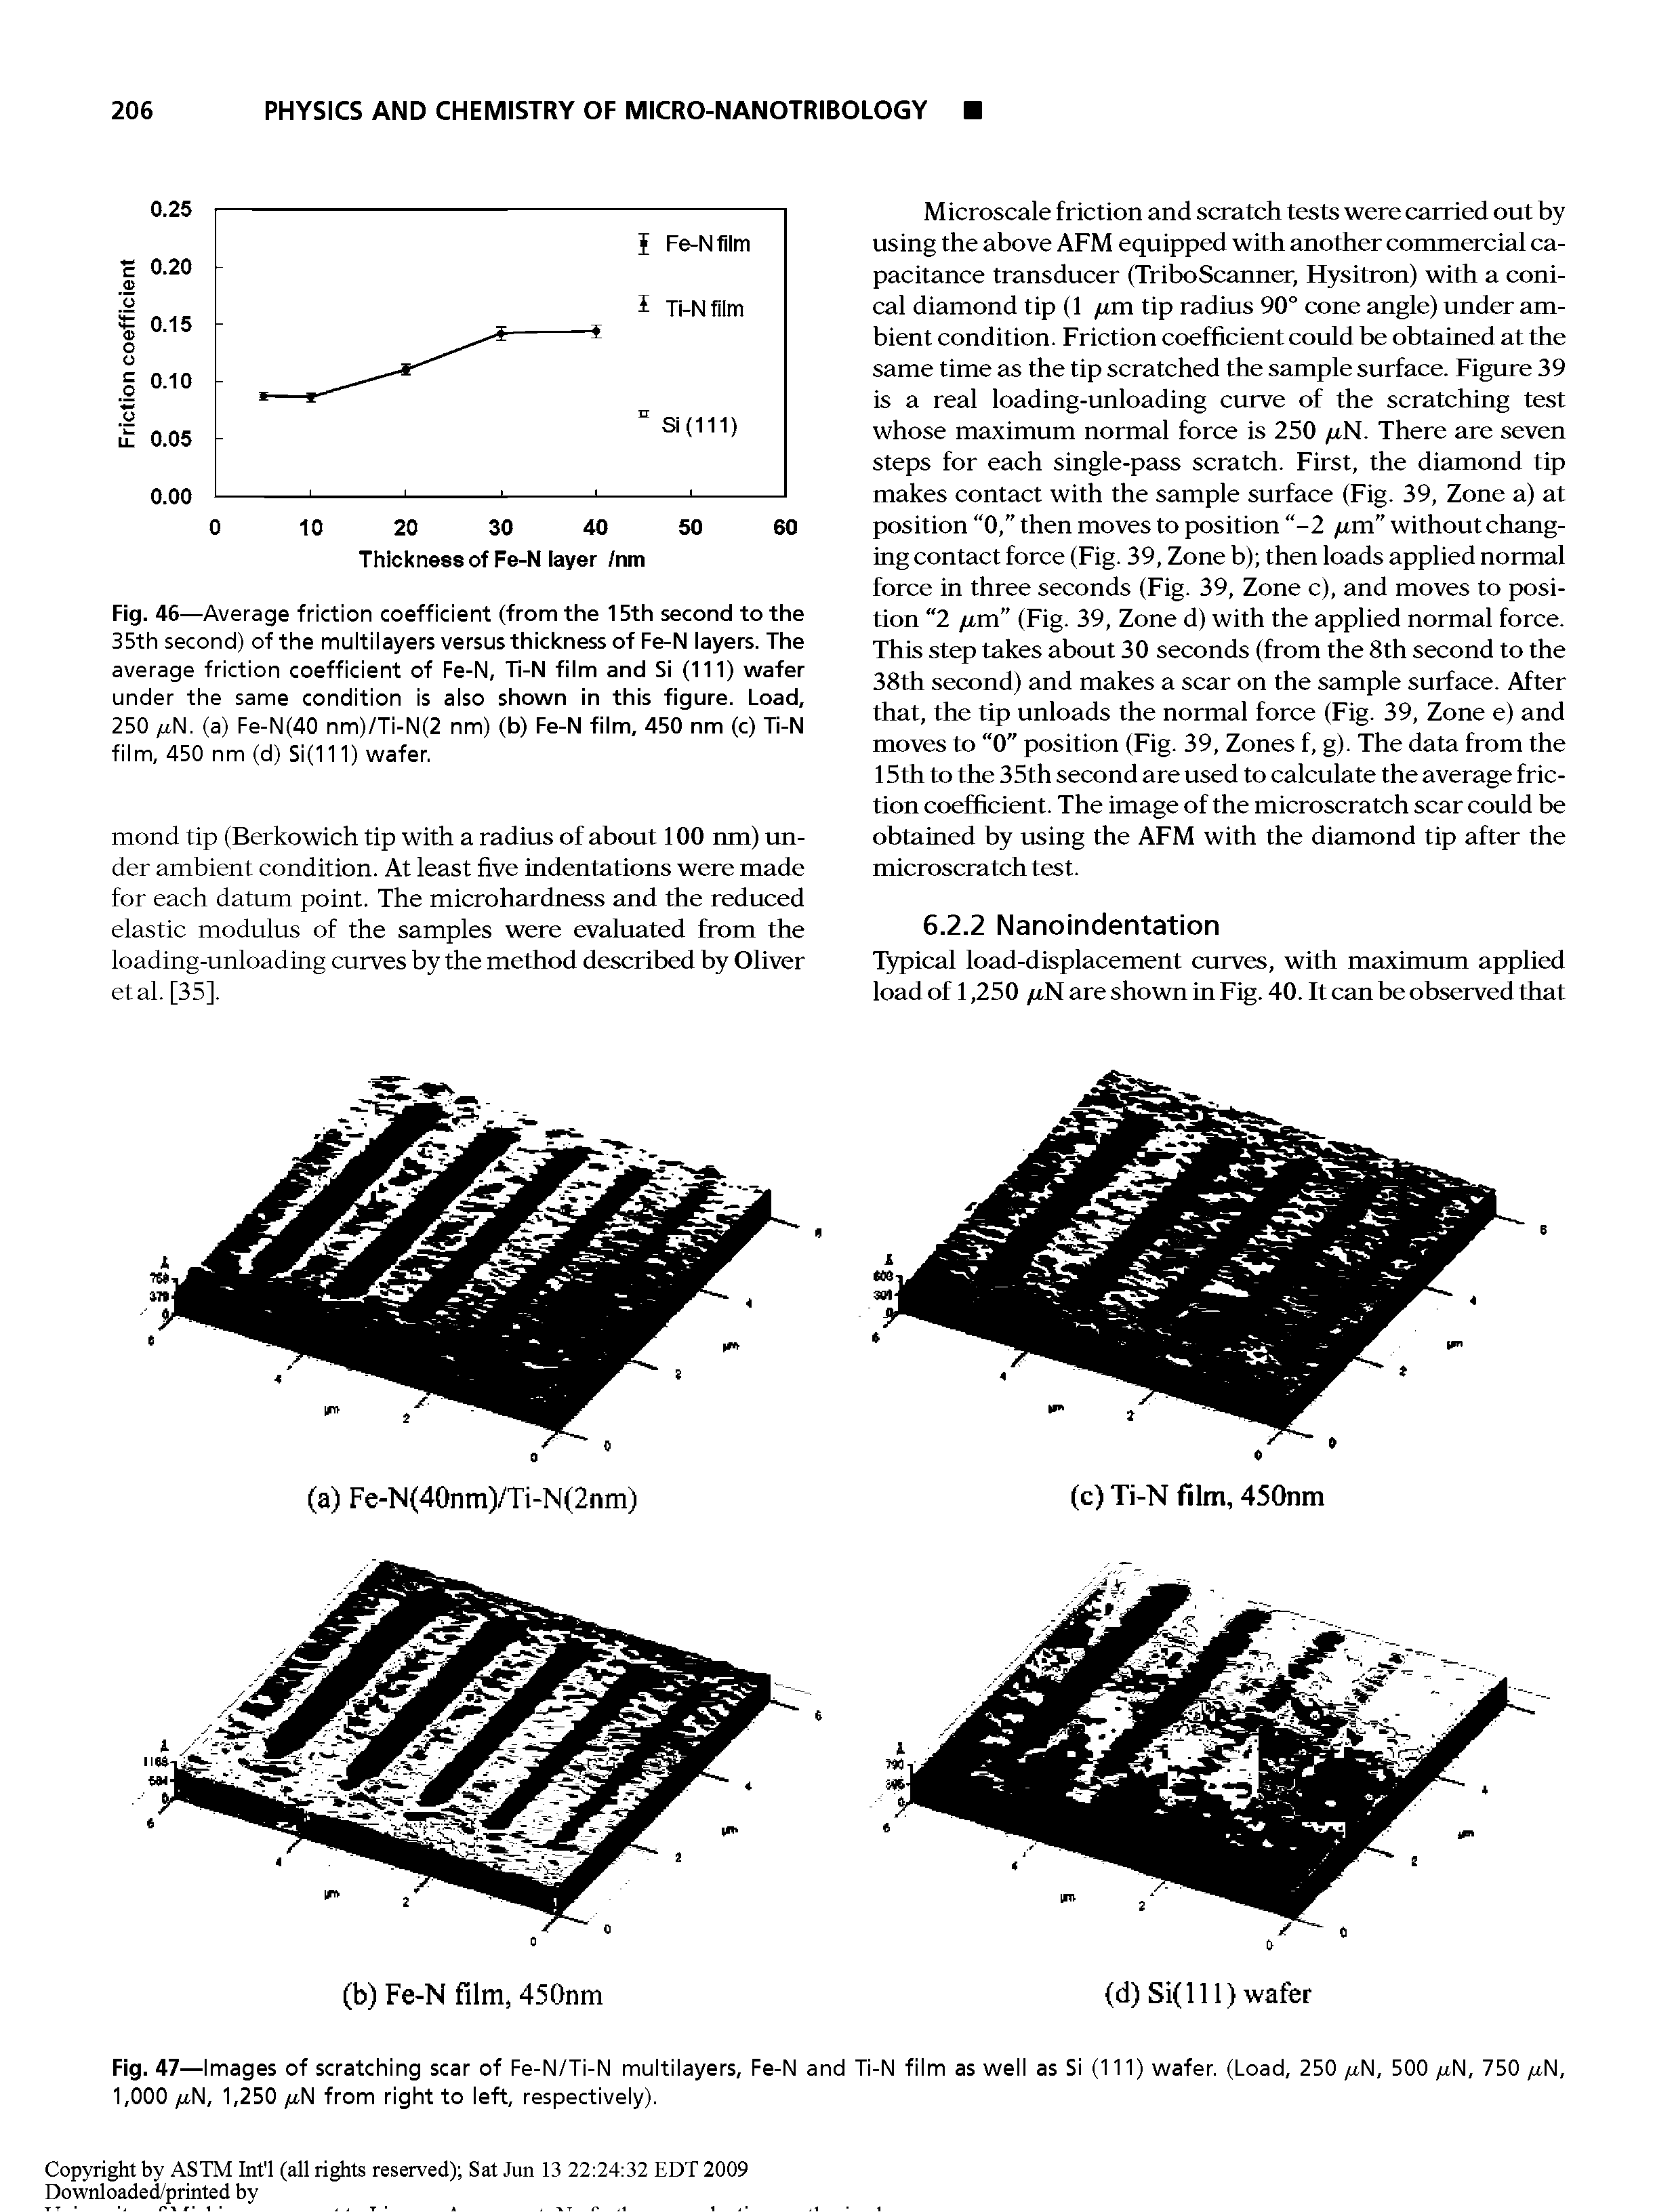 Fig. 47—Images of scratching scar of Fe-N/Ti-N multilayers, Fe-N and Ti-N film as well as Si (111) wafer. (Load, 250 aN, 500 aN, 750 aN, 1,000 aN, 1,250 aN from right to left, respectively).